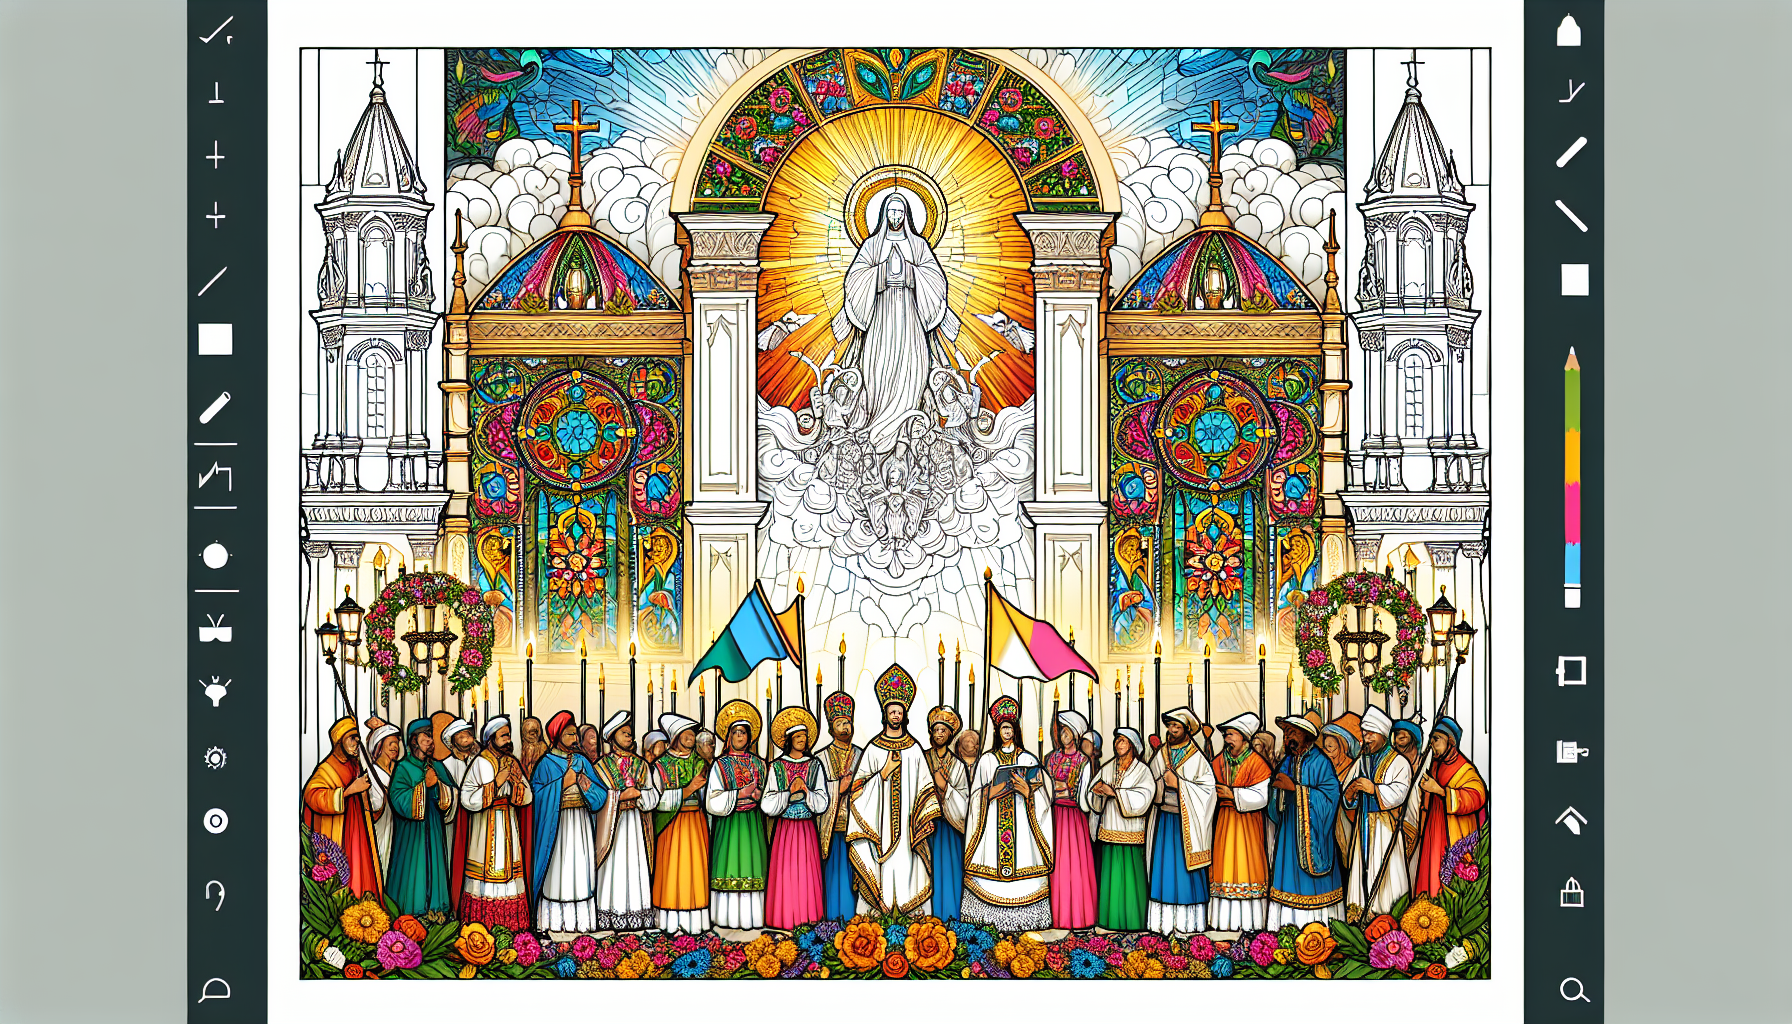 An elaborate and vibrant scene of a religious festival celebrating the Fiesta de la Transfiguración. The setting is a beautiful church adorned with colorful banners, flowers, and ornate decorations. P